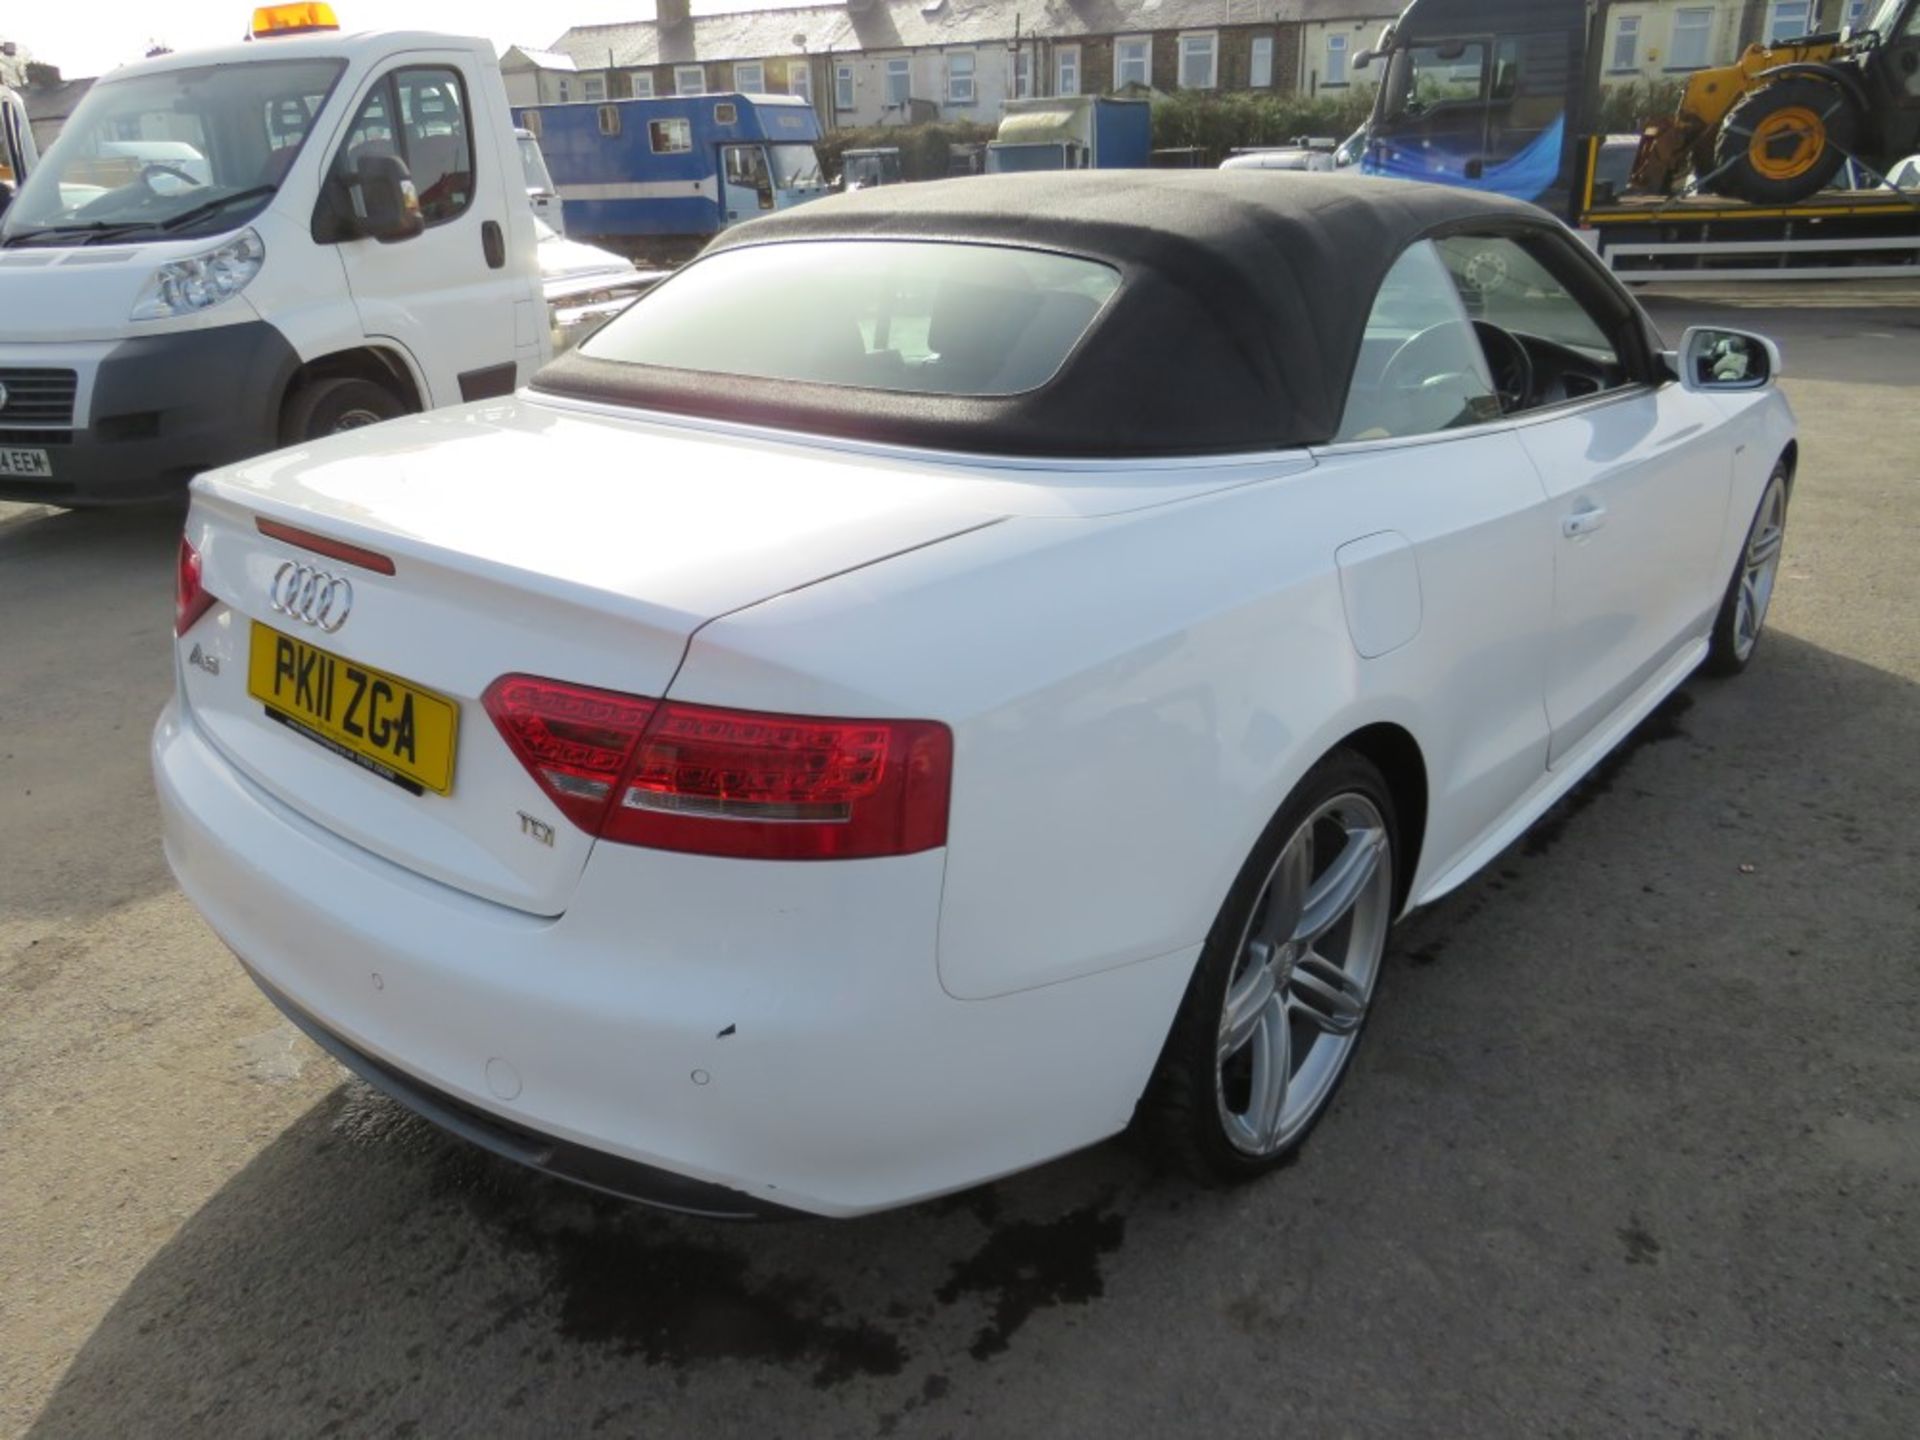 11 reg AUDI A5 S LINE TDI CONVERTIBLE, 1ST REG 05/11, TEST 12/21, 103539M, V5 HERE, 4 FORMER KEEPERS - Image 4 of 6